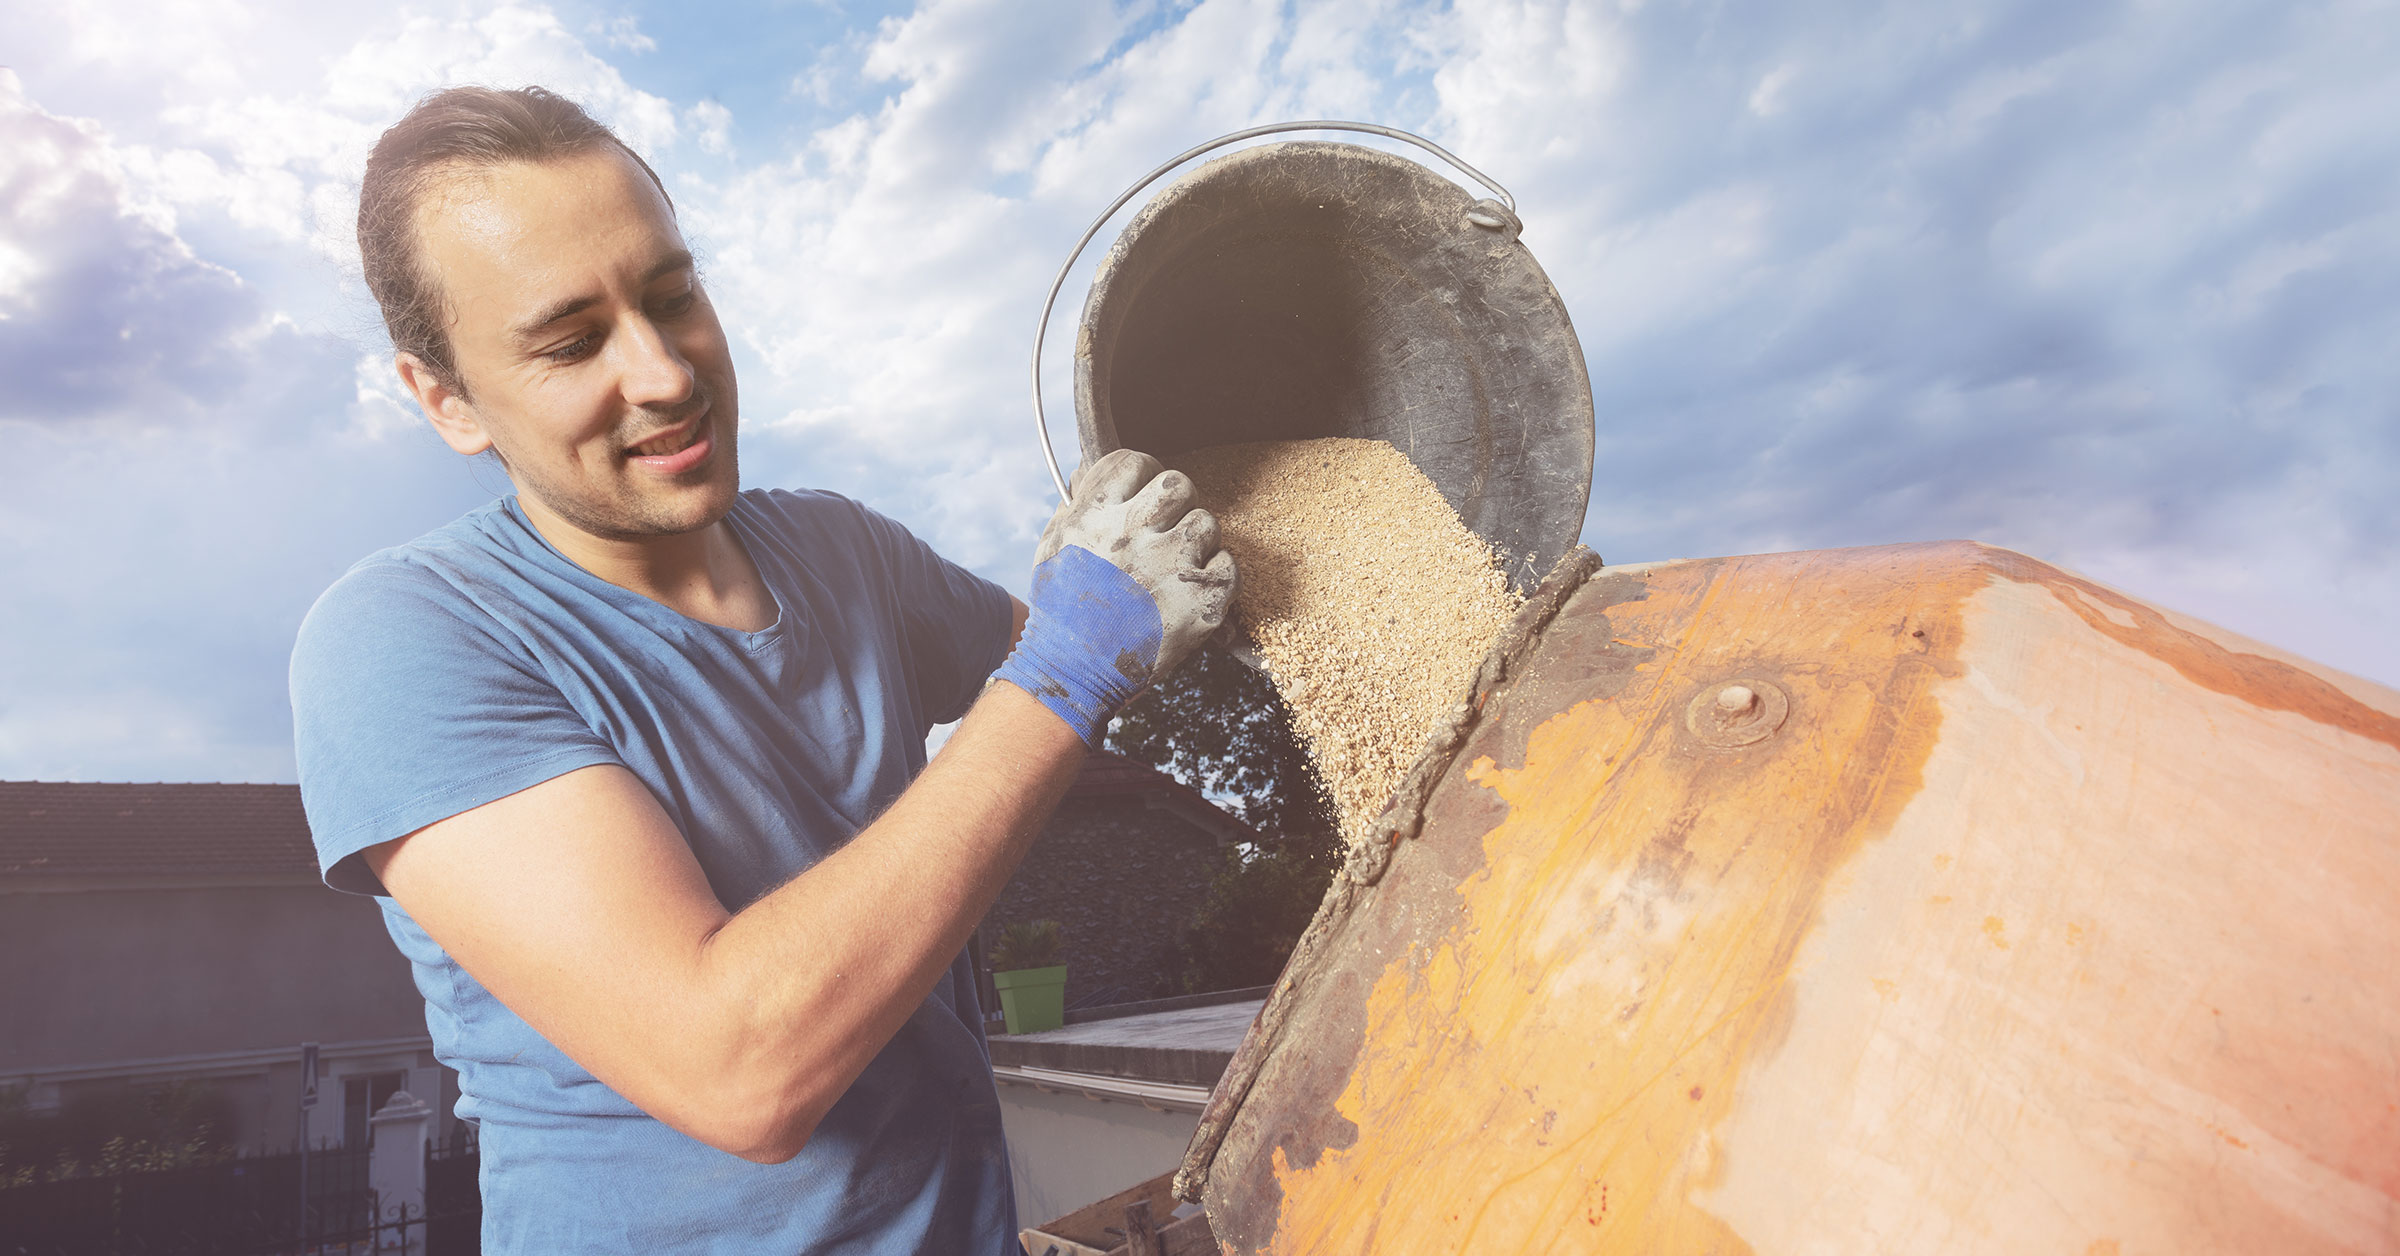 A photo of a professional builder placing concrete in a cement mixer.